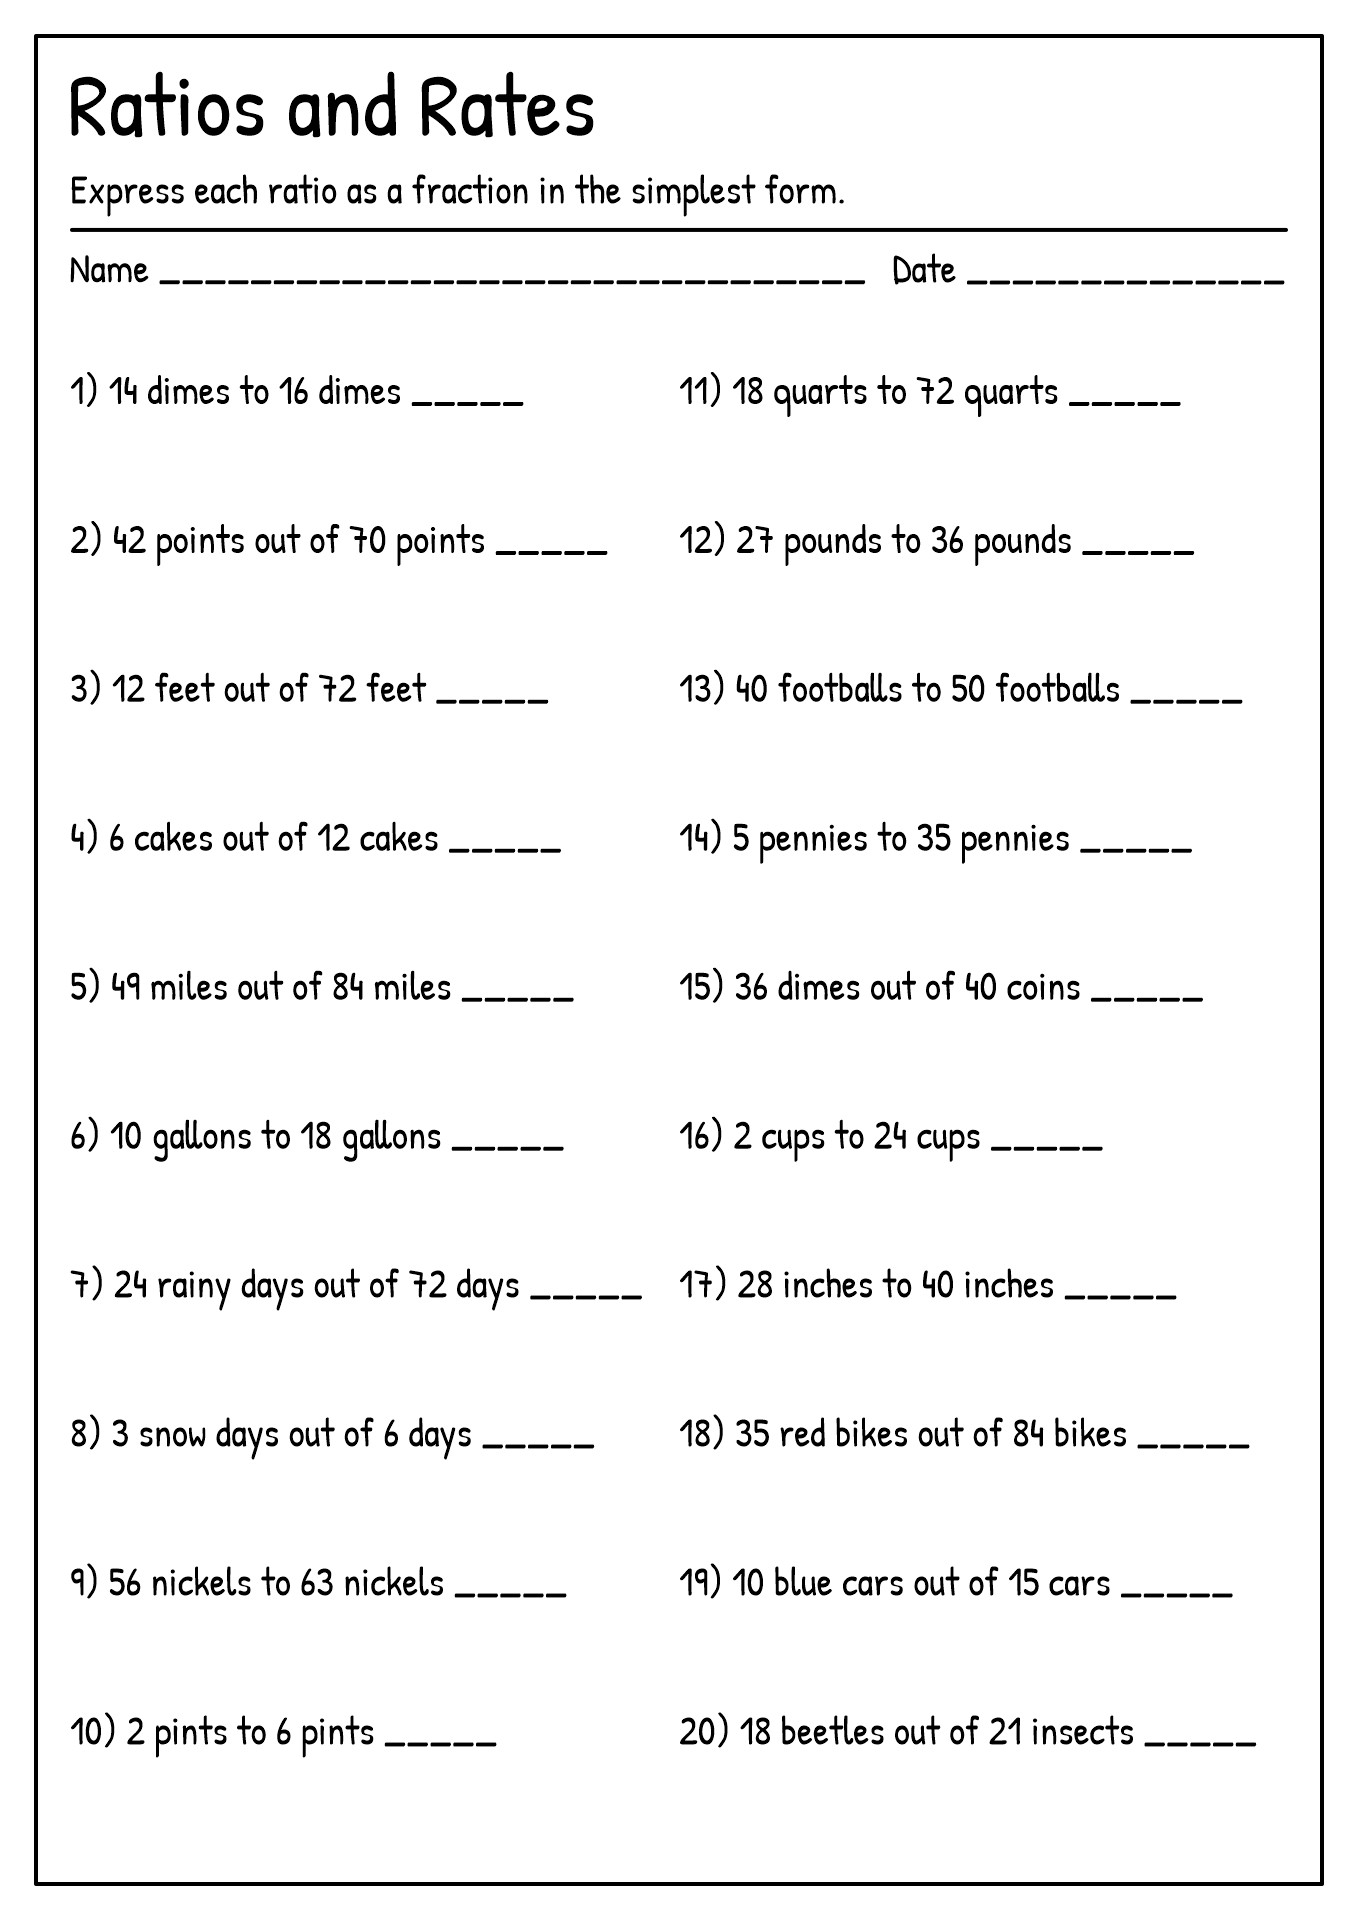 Ratios Rates And Proportions Worksheet